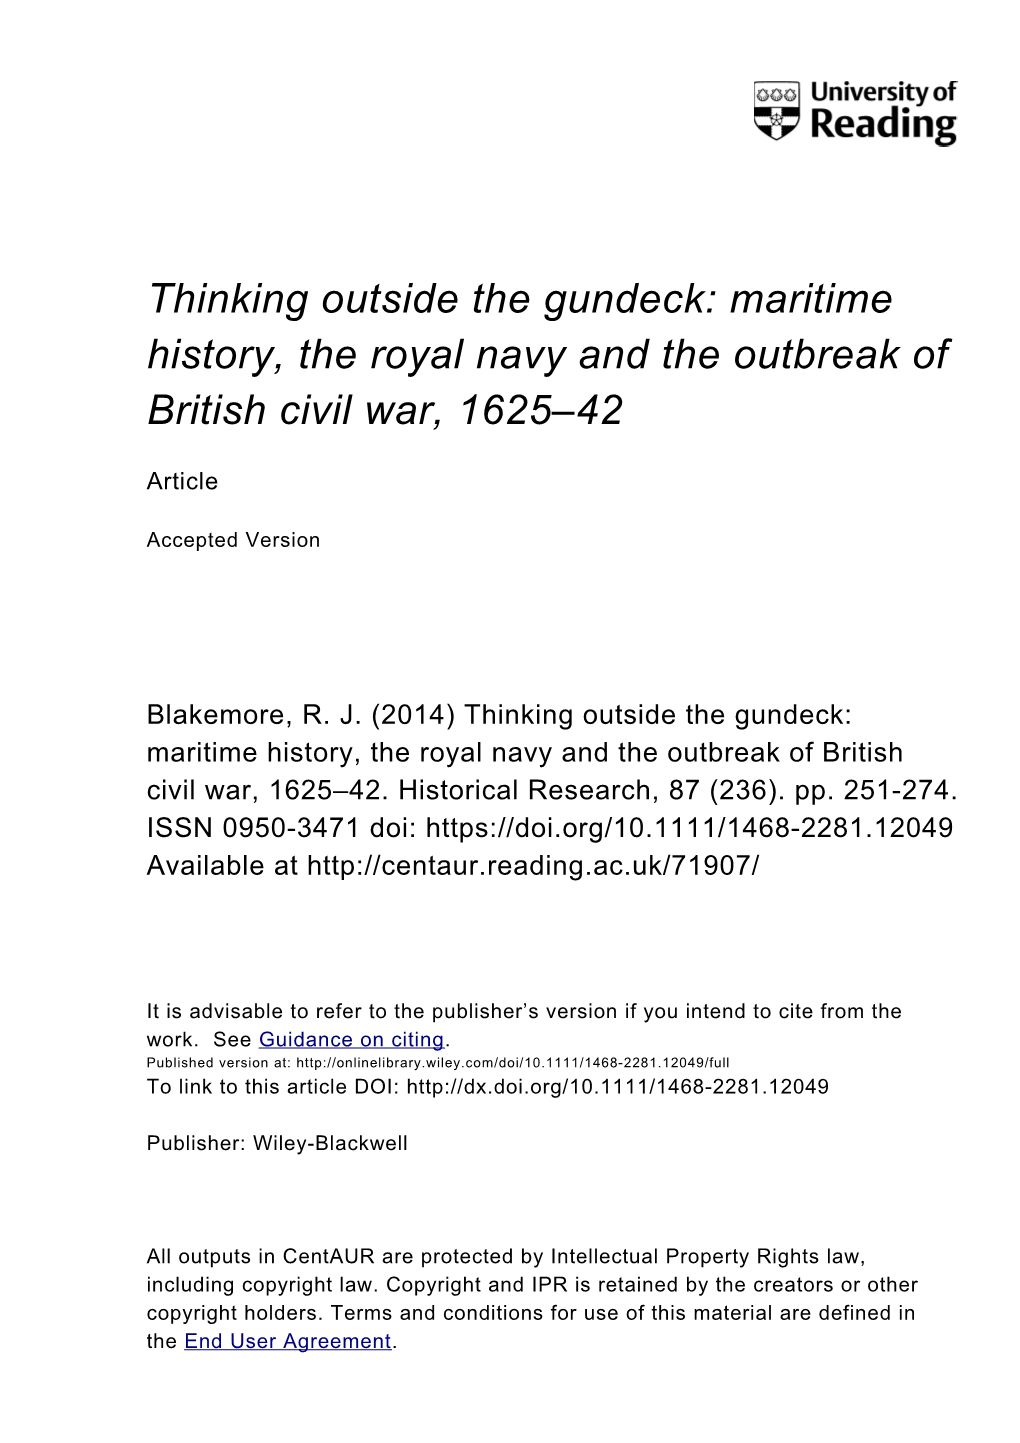 Maritime History, the Royal Navy and the Outbreak of British Civil War, 1625–42